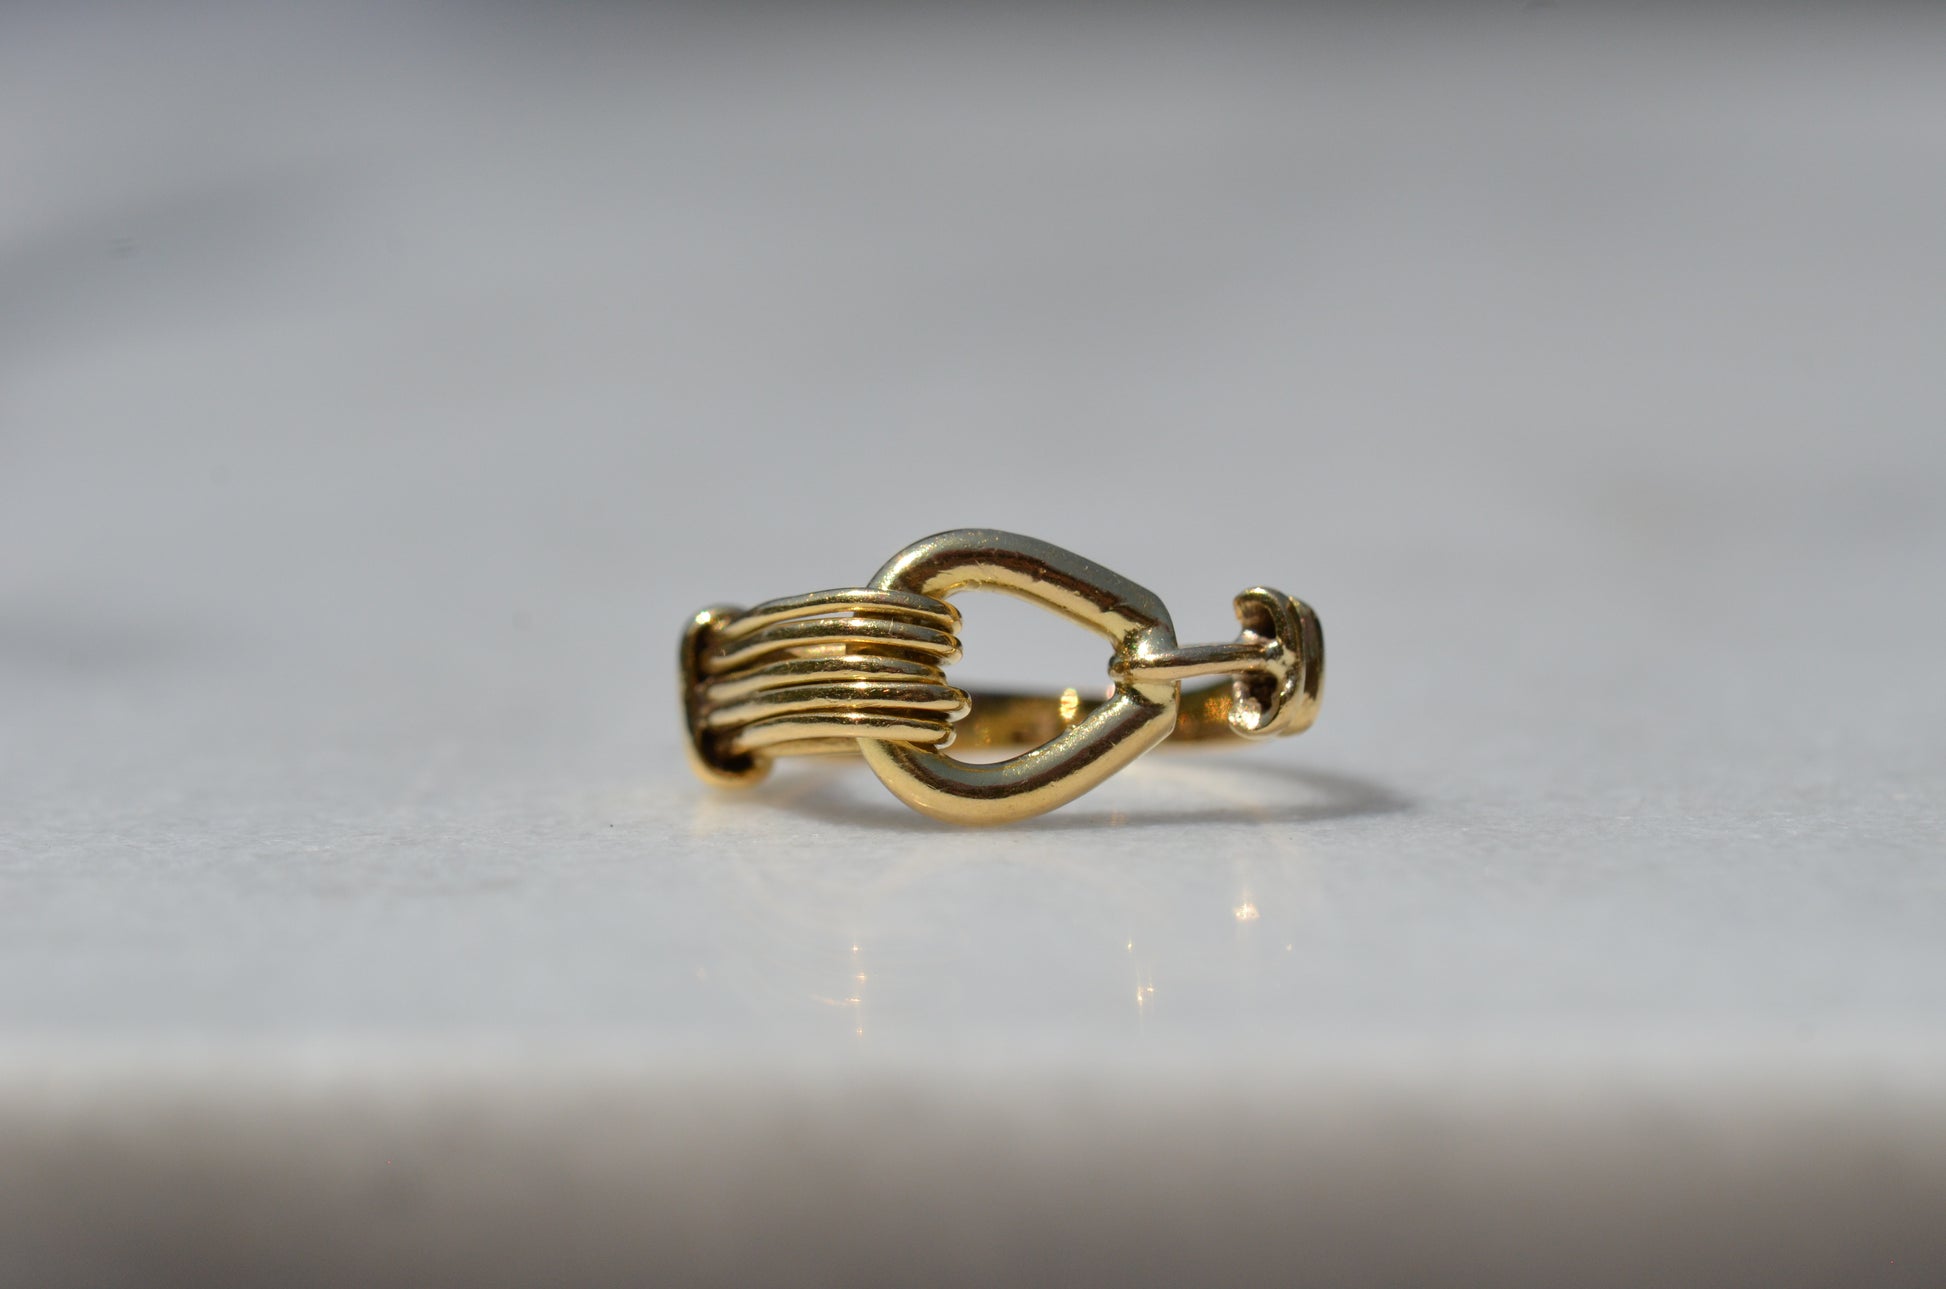 A closely cropped macro of a heavily detailed ring in the form of a stylized stirrup. Asymmetrically designed, an east-west oriented pear-shaped loop is held by wire detailing on each side.